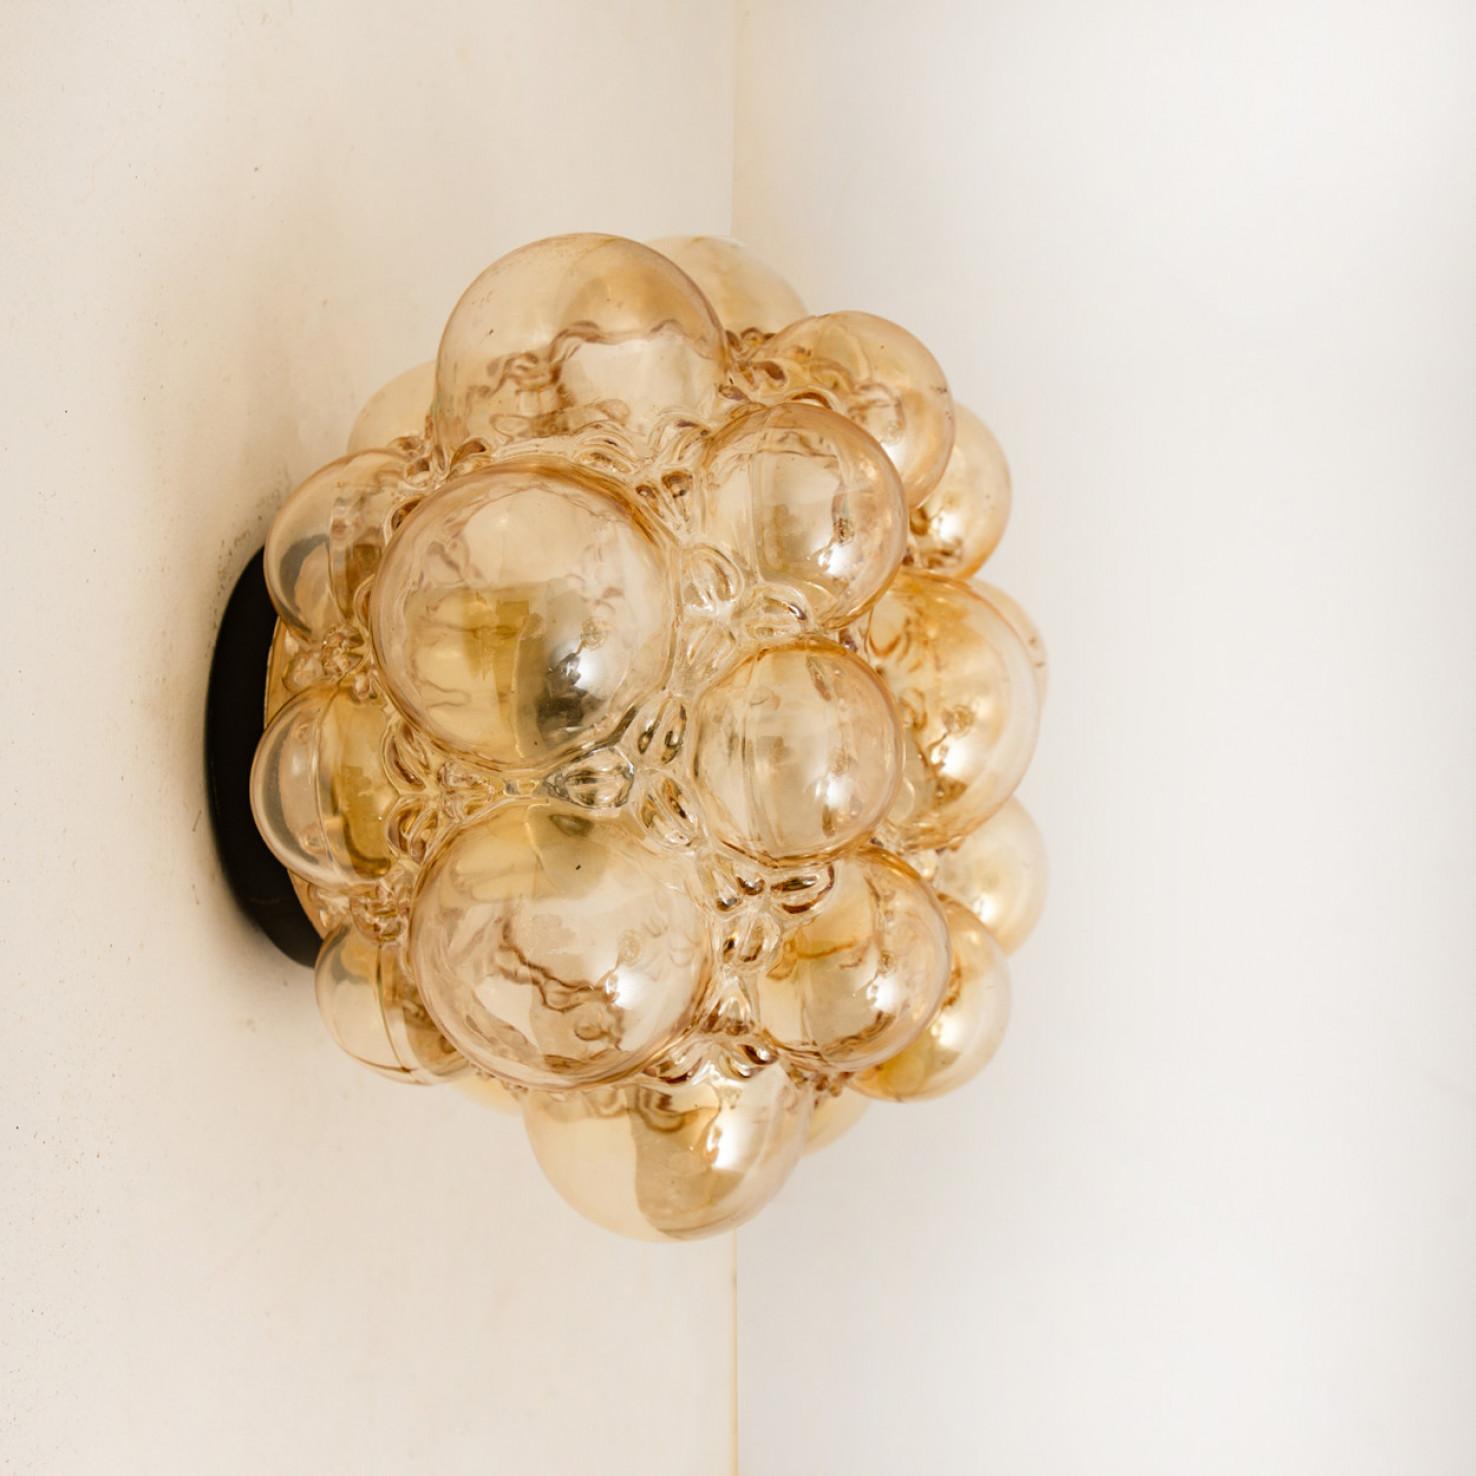 1 of the 2 beautiful bubble glass light fixtures designed by Helena Tynell for Glashütte Limburg. Design Classics, the hand blown glass gives a wonderful warm glow. Illuminates beautifully on the wall and ceiling.

Dimensions wall lights:
Height